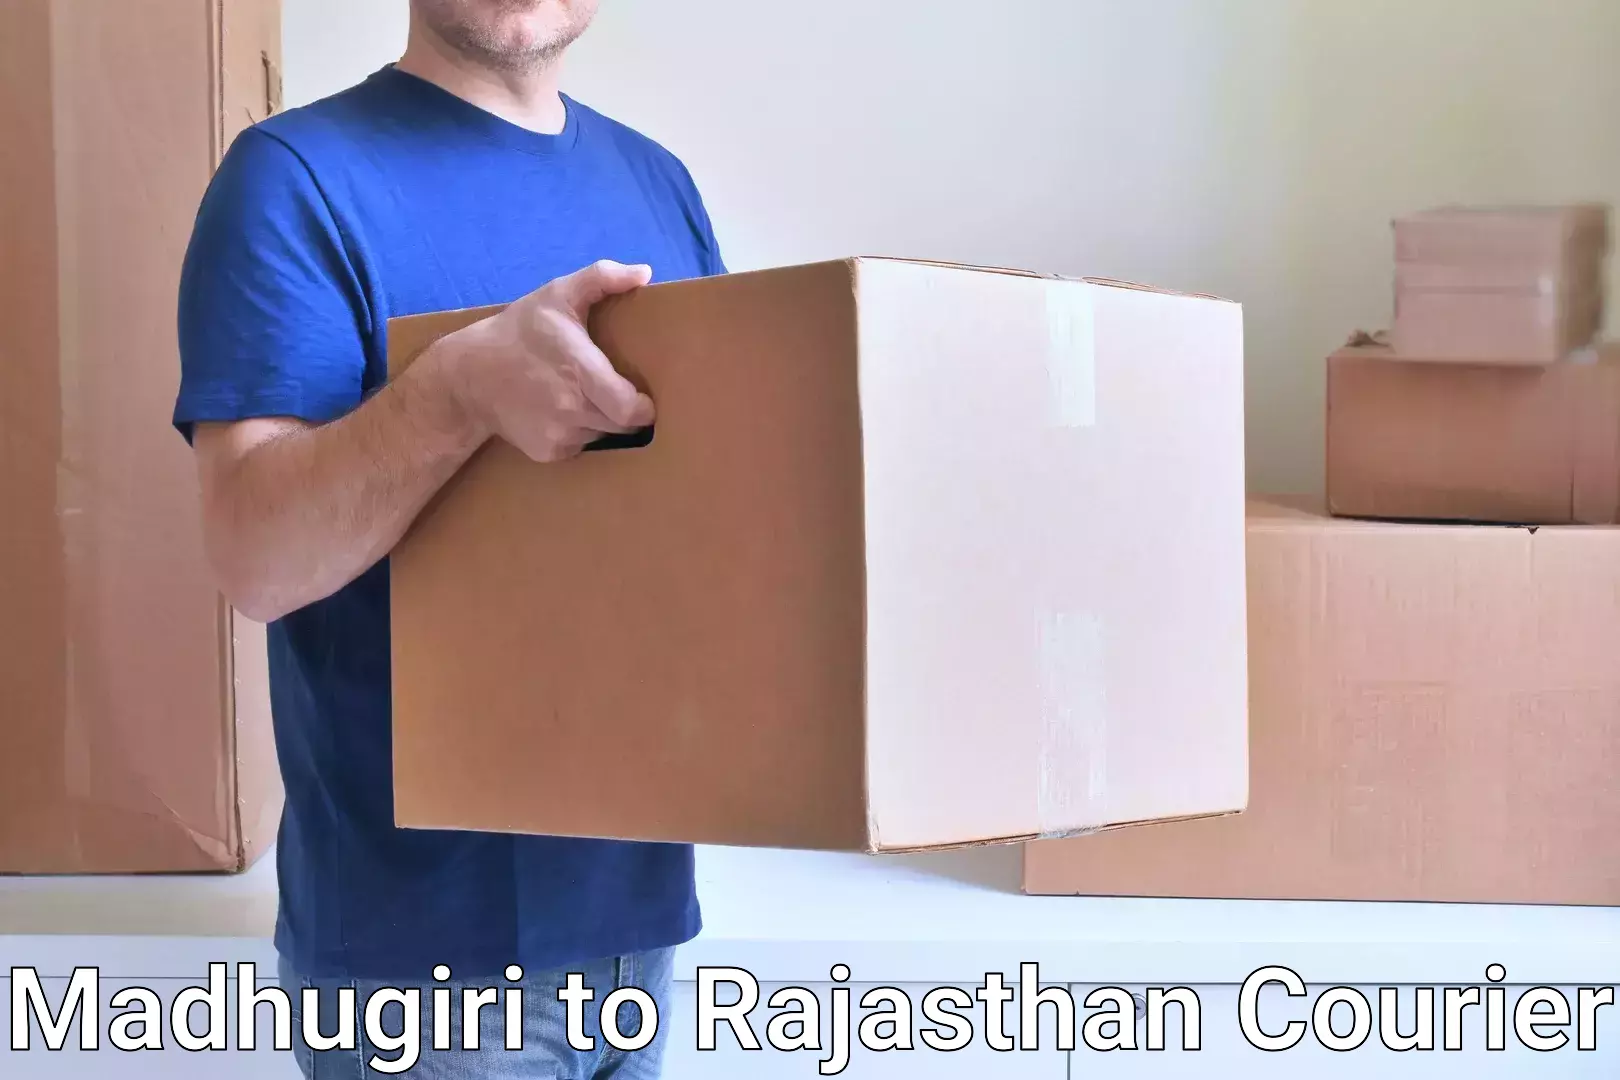 Full-service courier options Madhugiri to Yeswanthapur